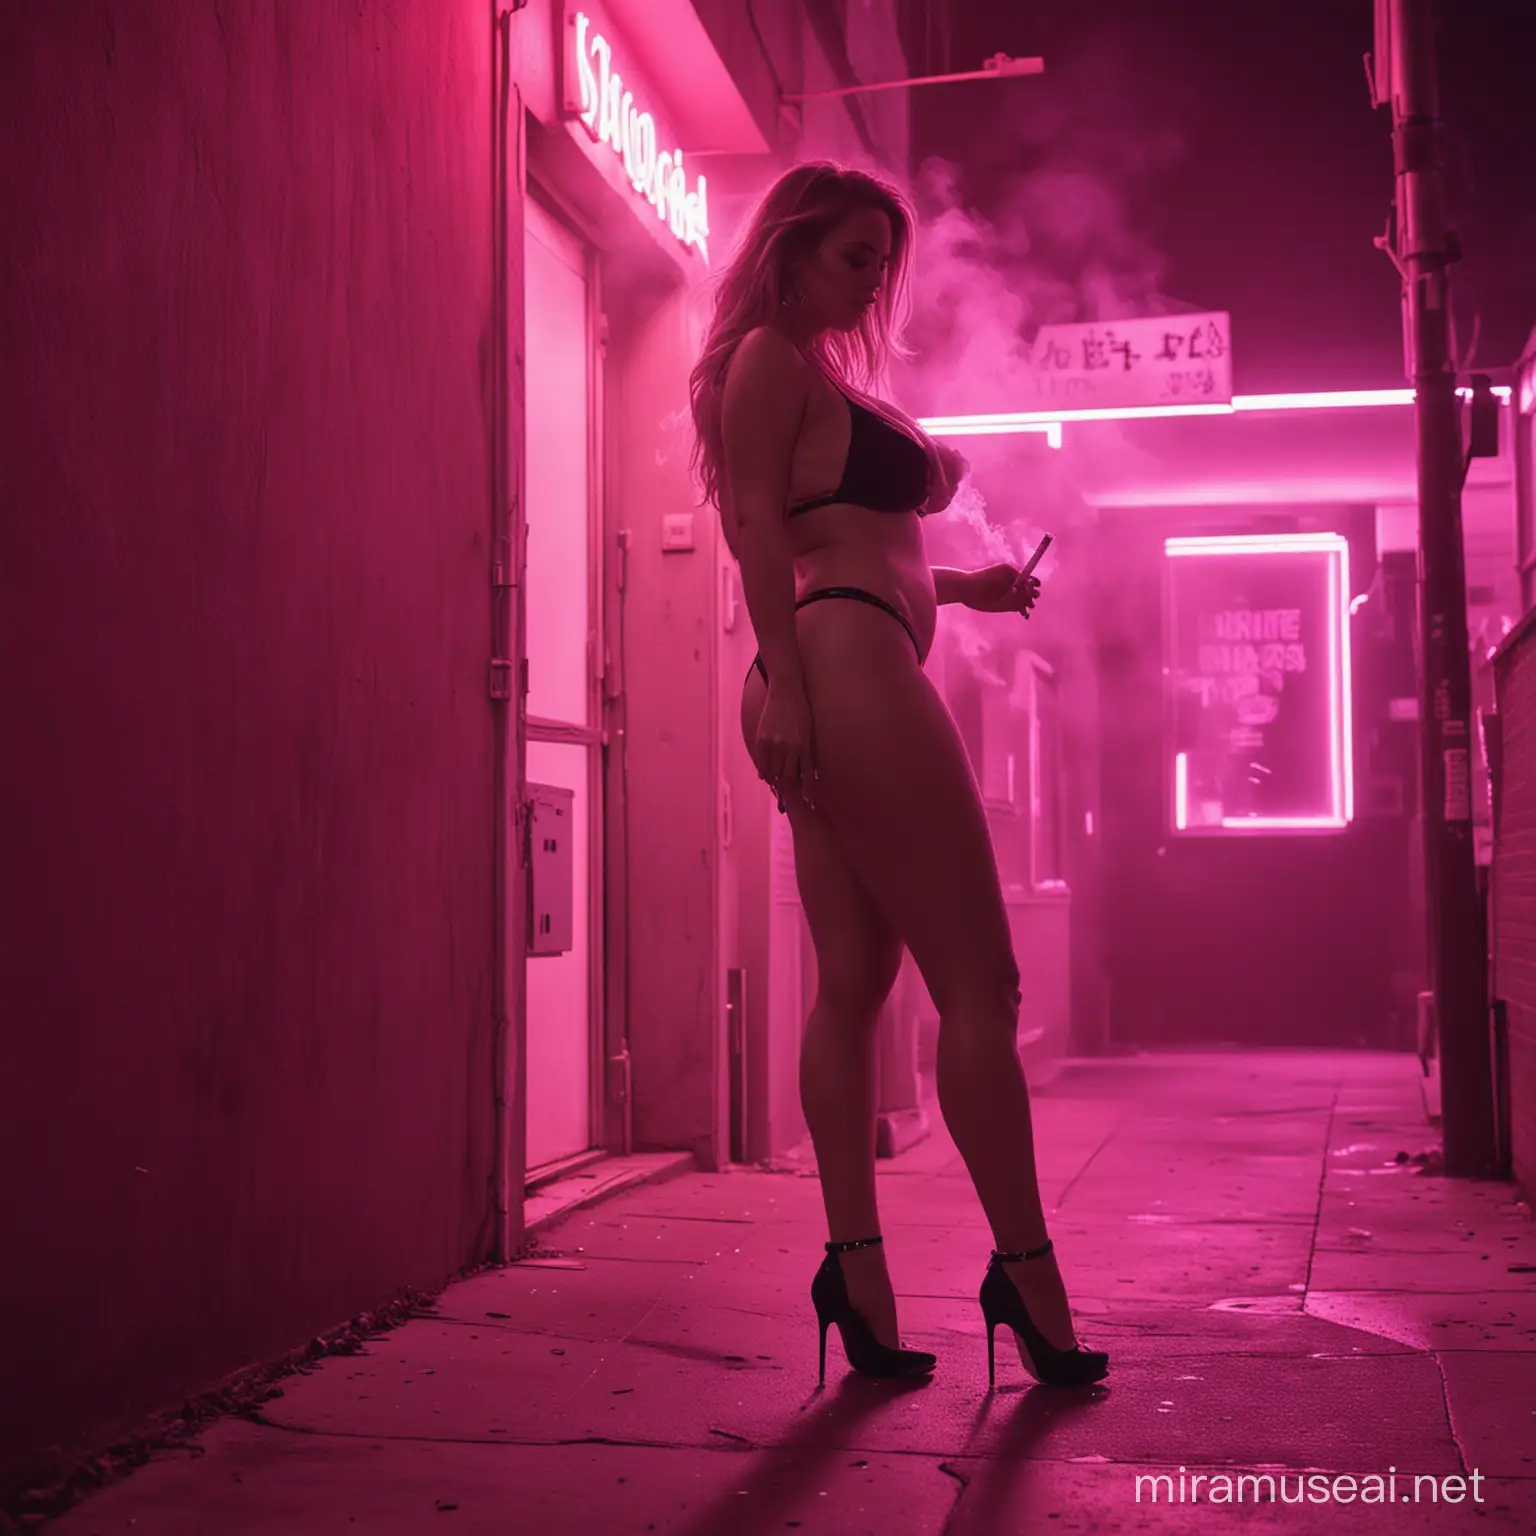 Nighttime Ambience Curvaceous Woman Smoking in Neonlit Brothel